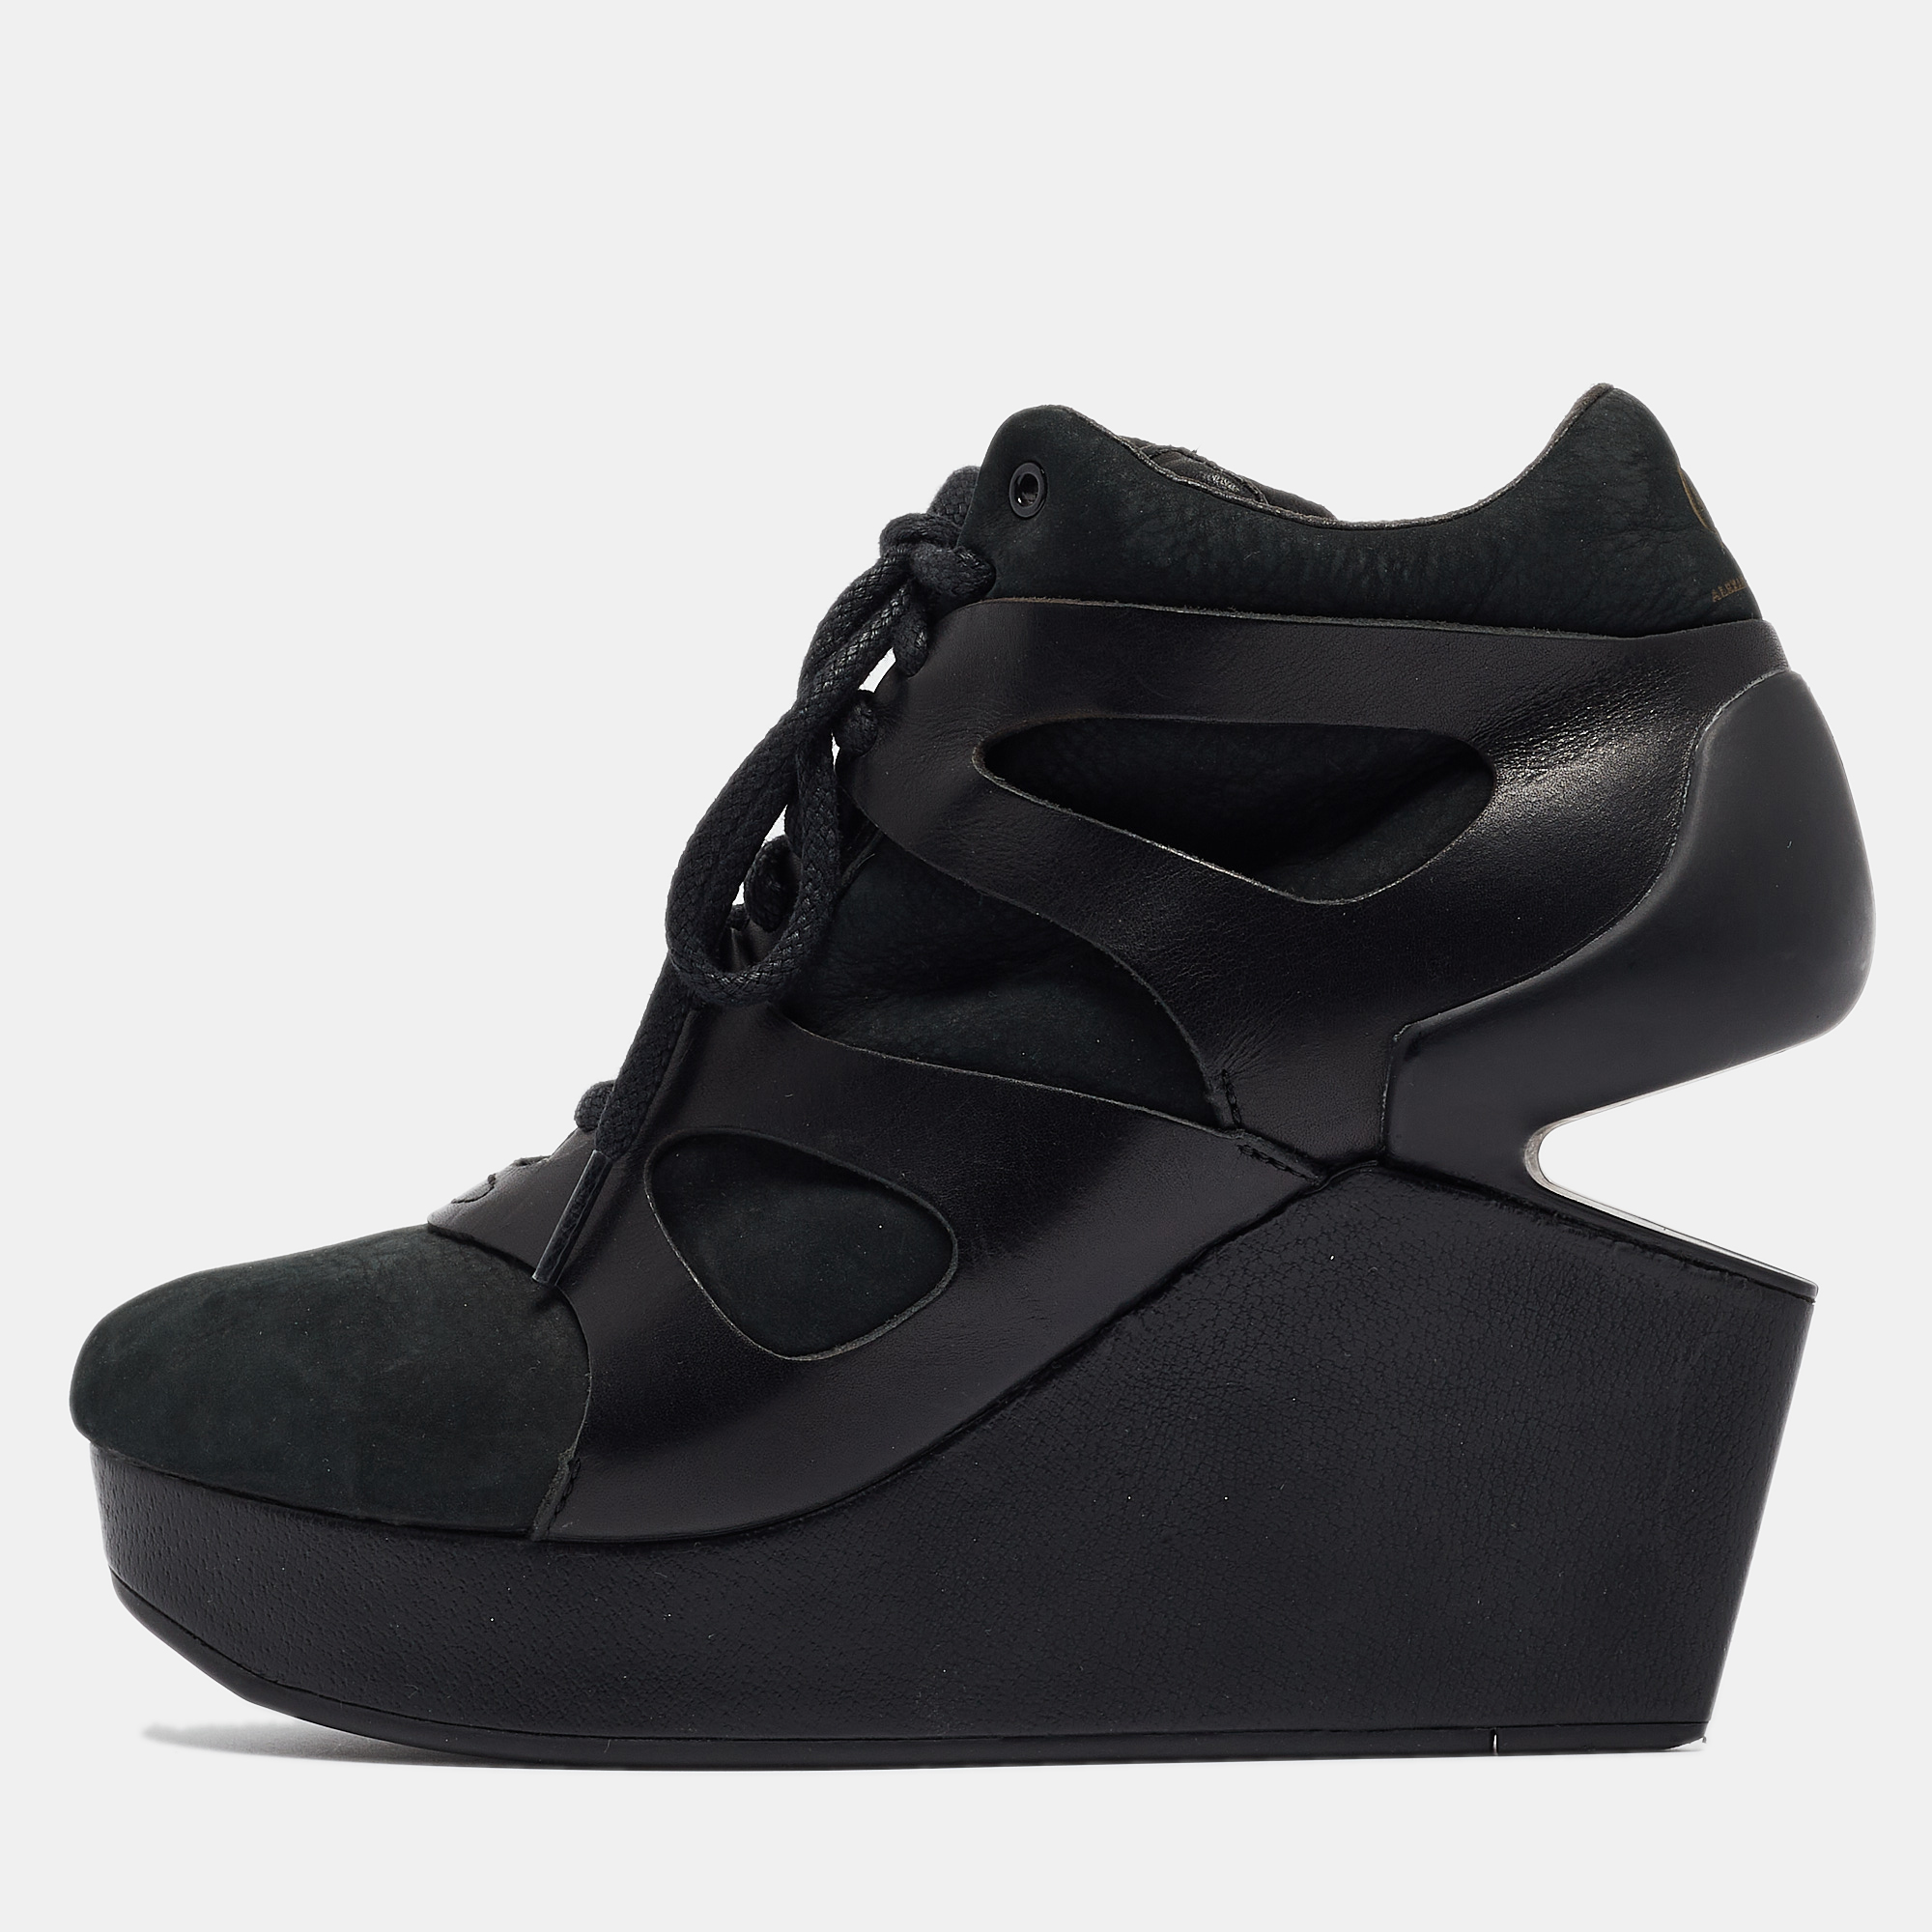 

McQ By Alexander McQueen For Puma Black Leather and Nubuck Leap Wedge Sneakers Size